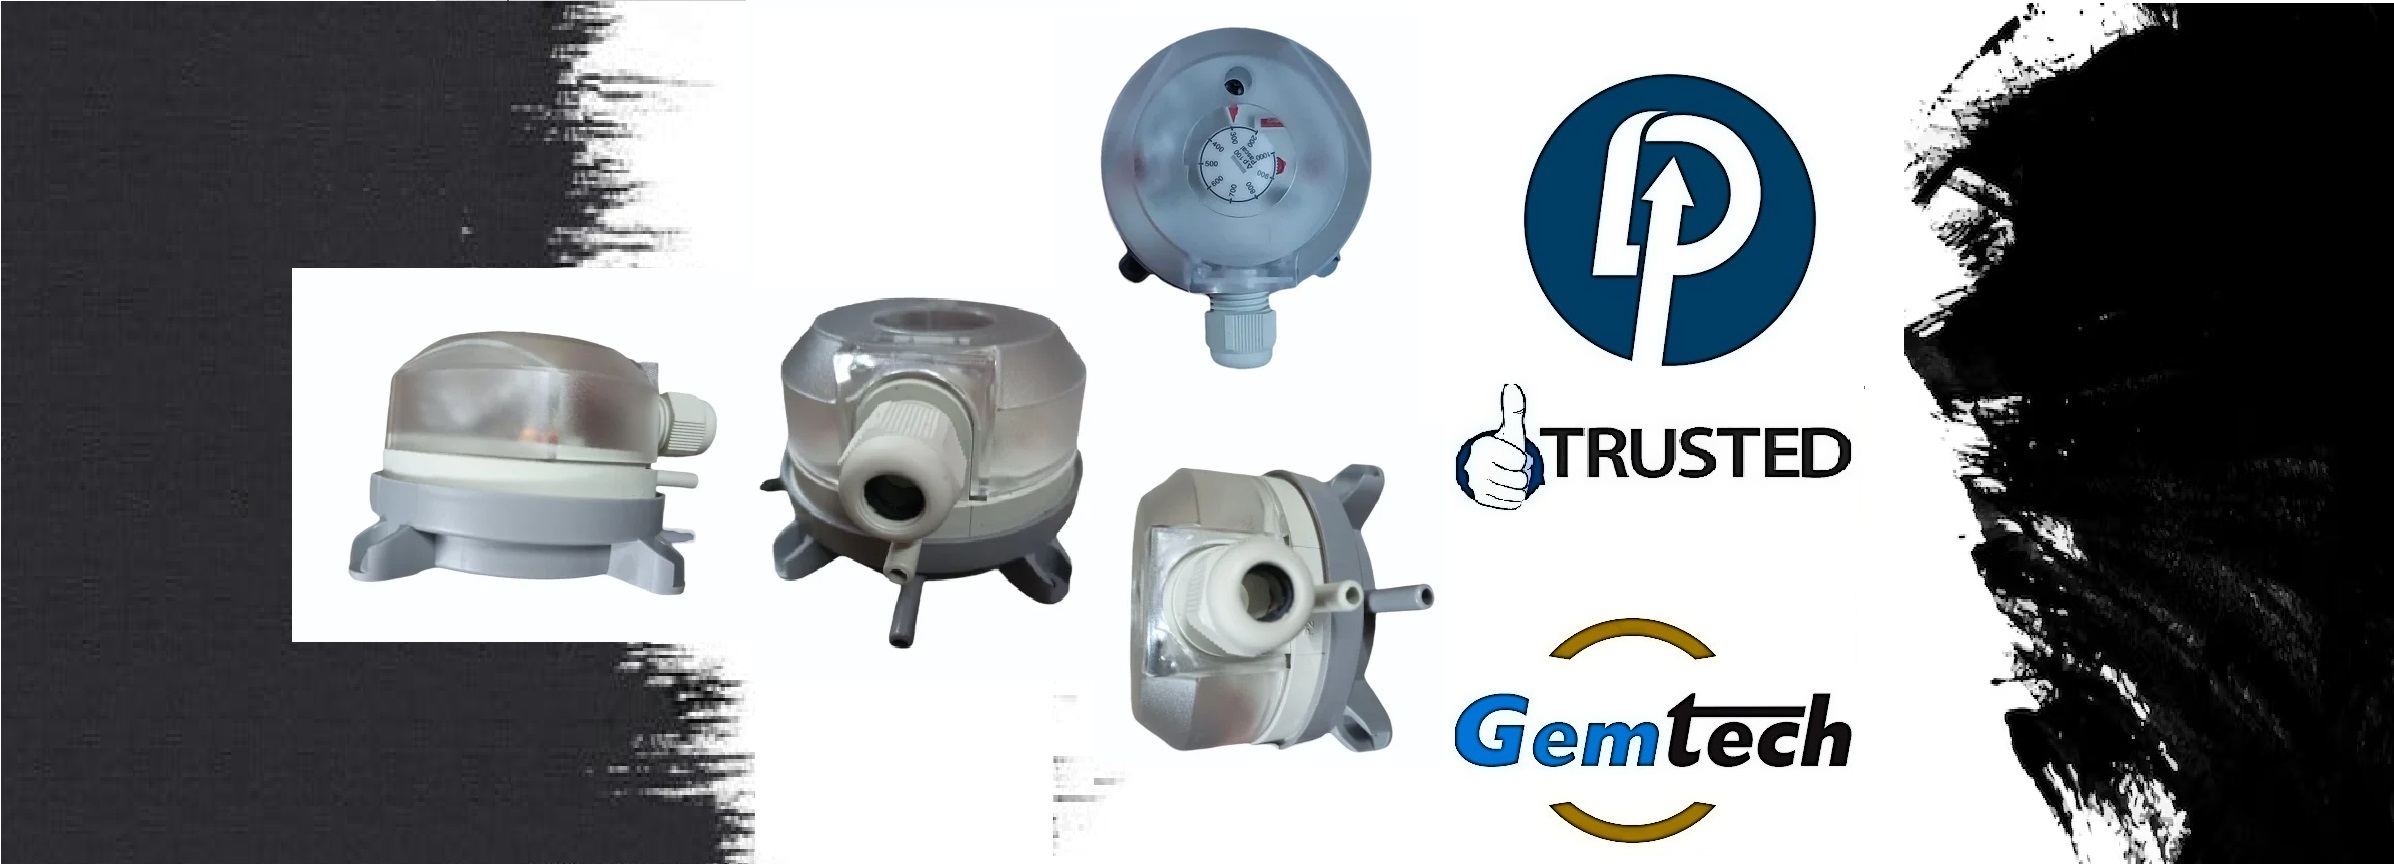 930.82 Gemtech Air Differential Pressure switch 50 - 500 PA by Pune Maharashtra